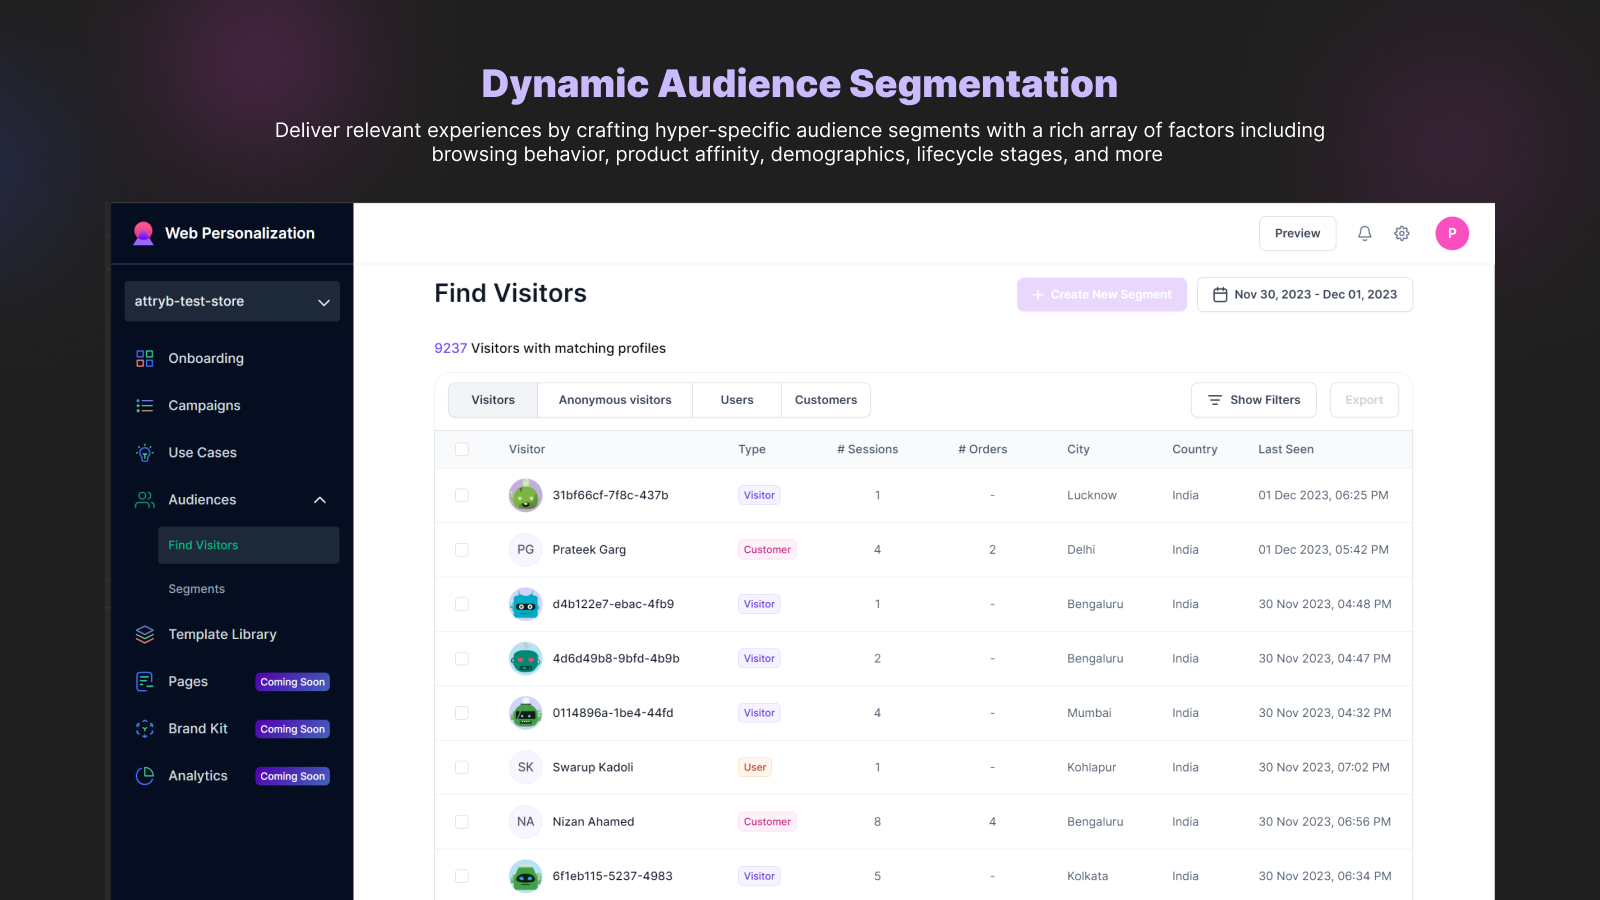 Dynamic Audience Segments - List of visitors in the segment